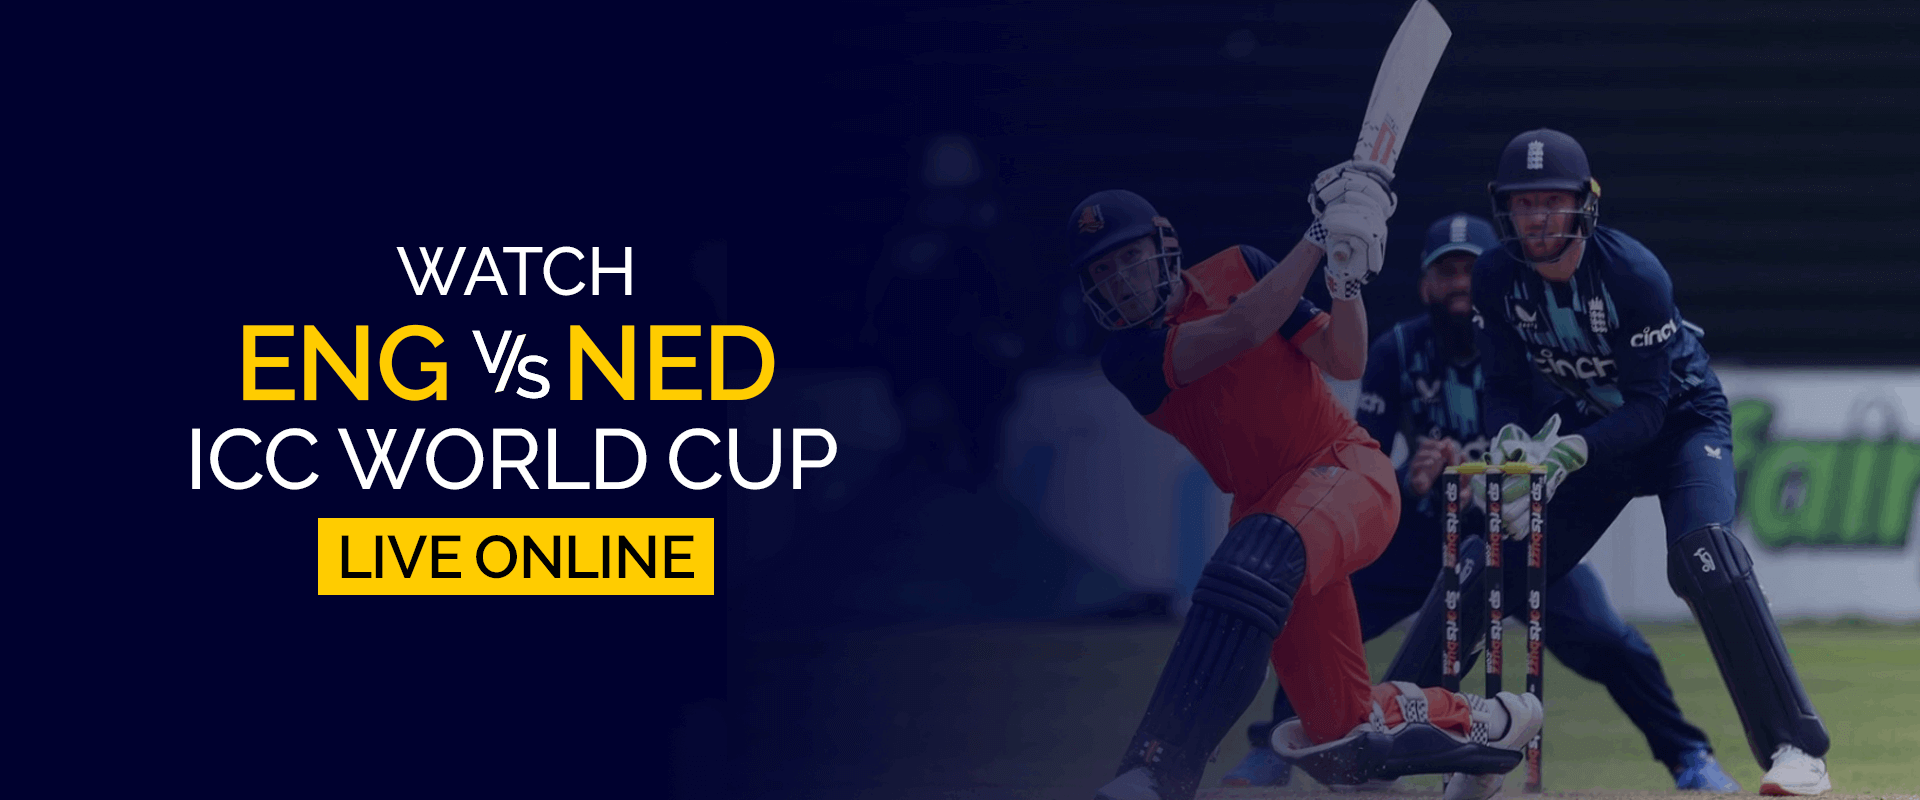 Watch England vs Netherlands ICC World Cup Live Online